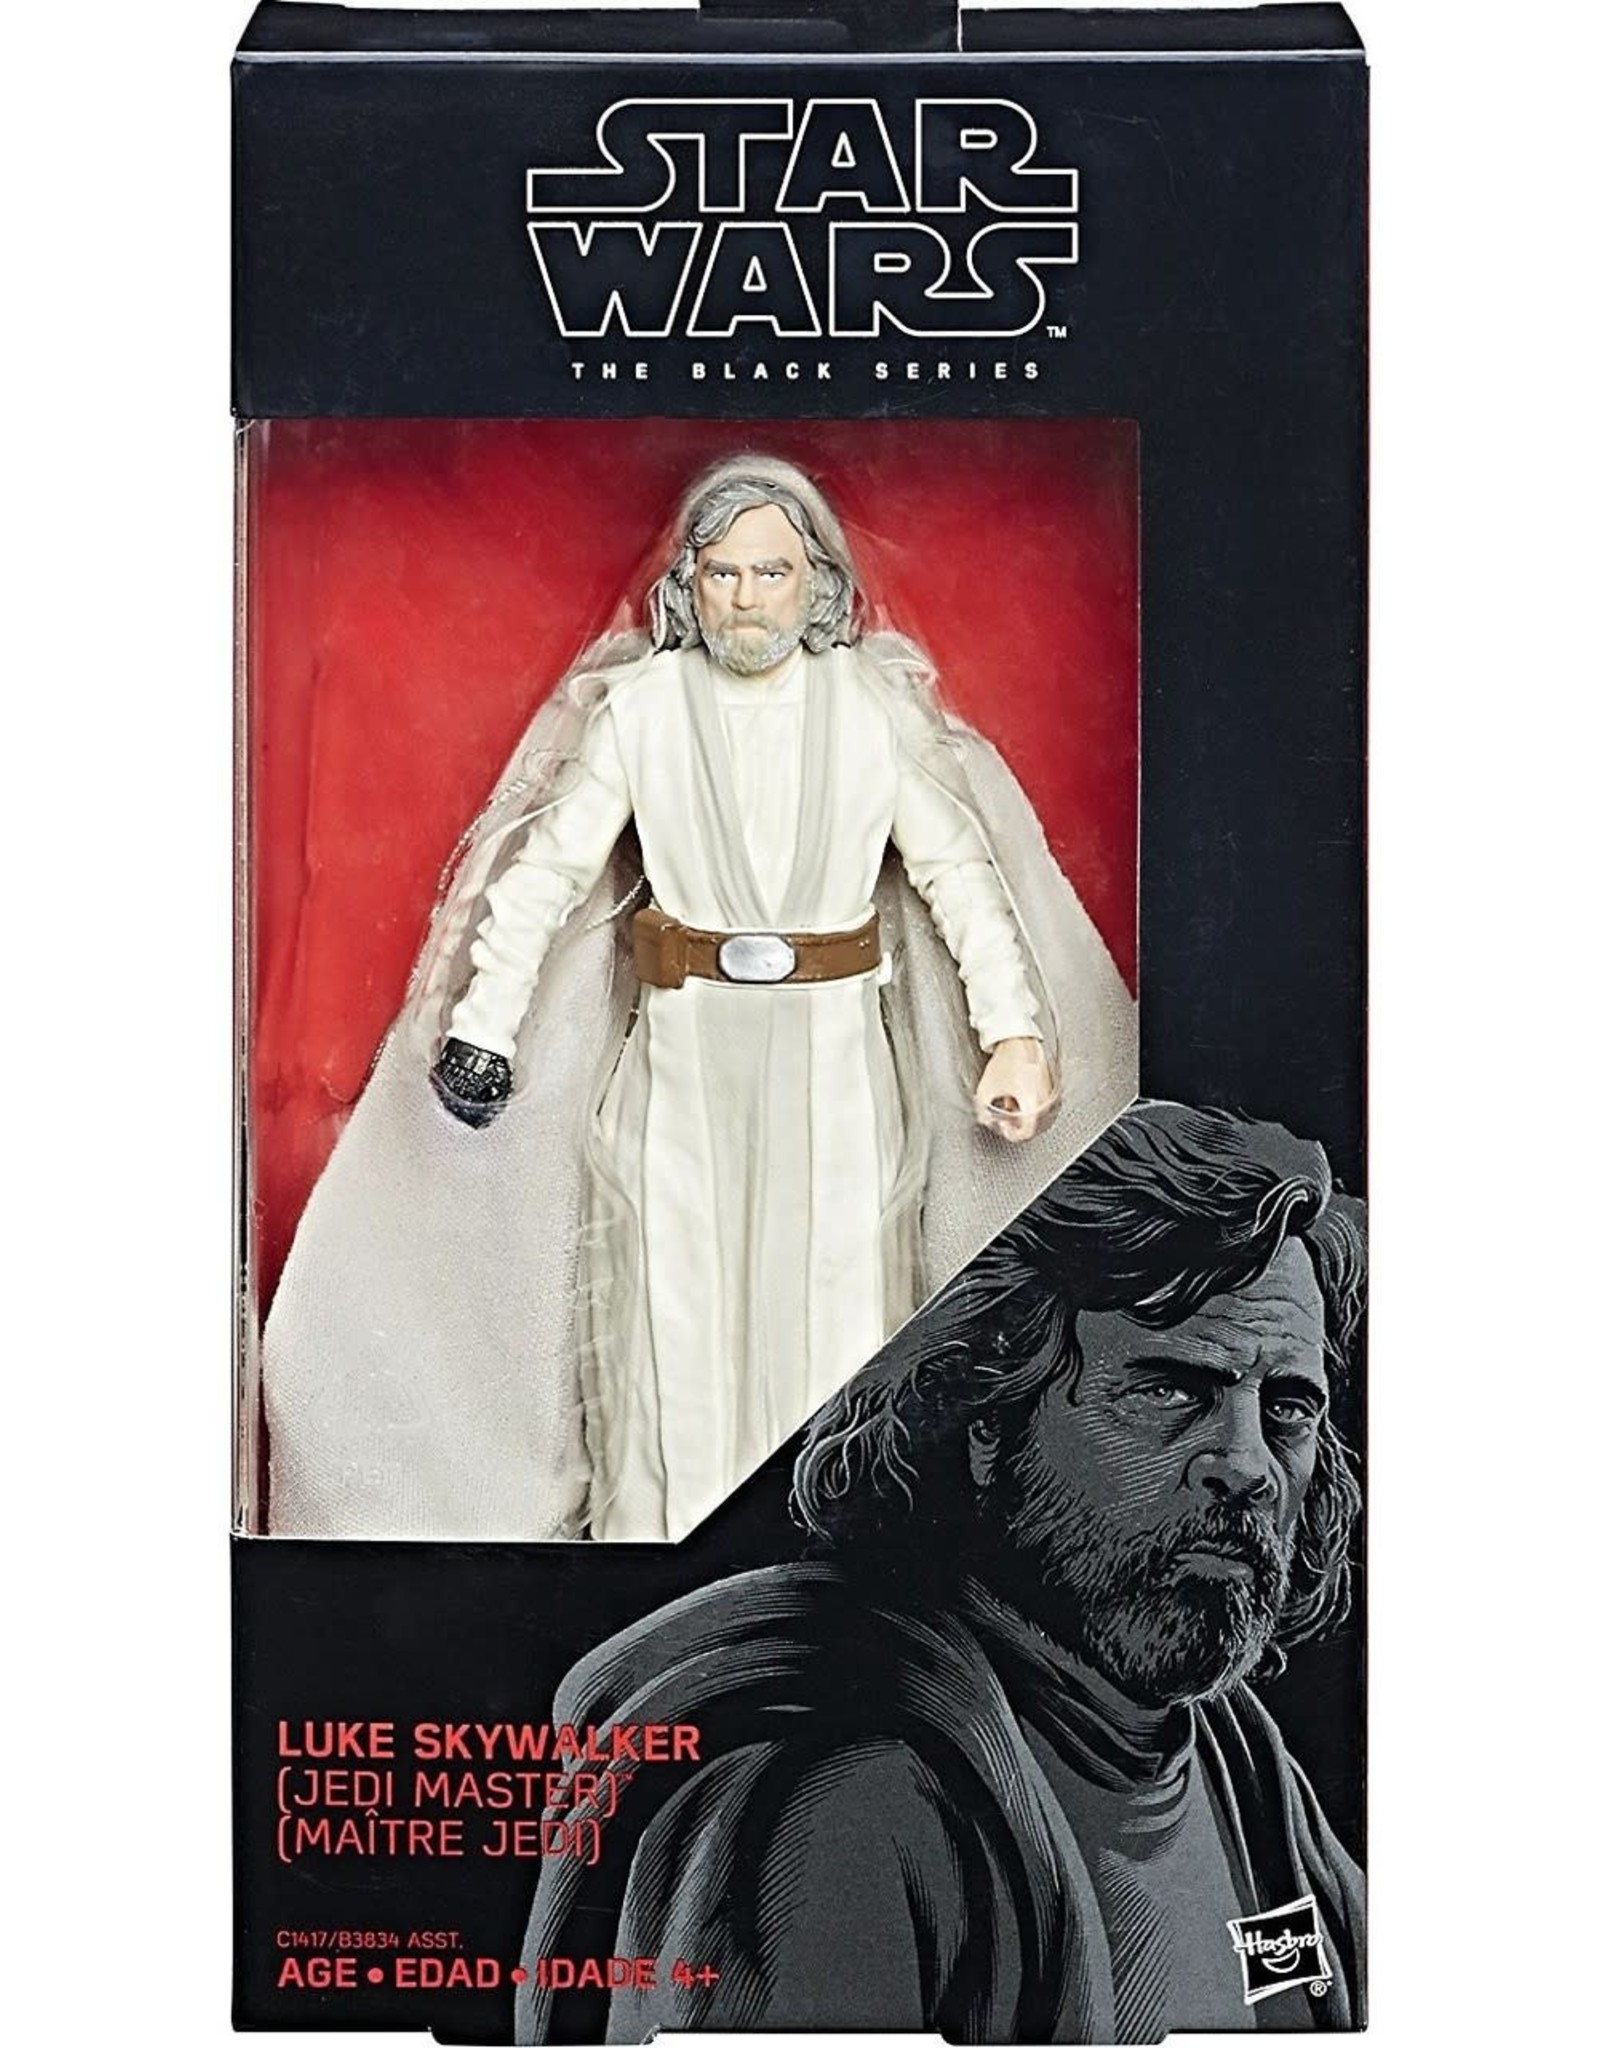 star wars the last jedi collection